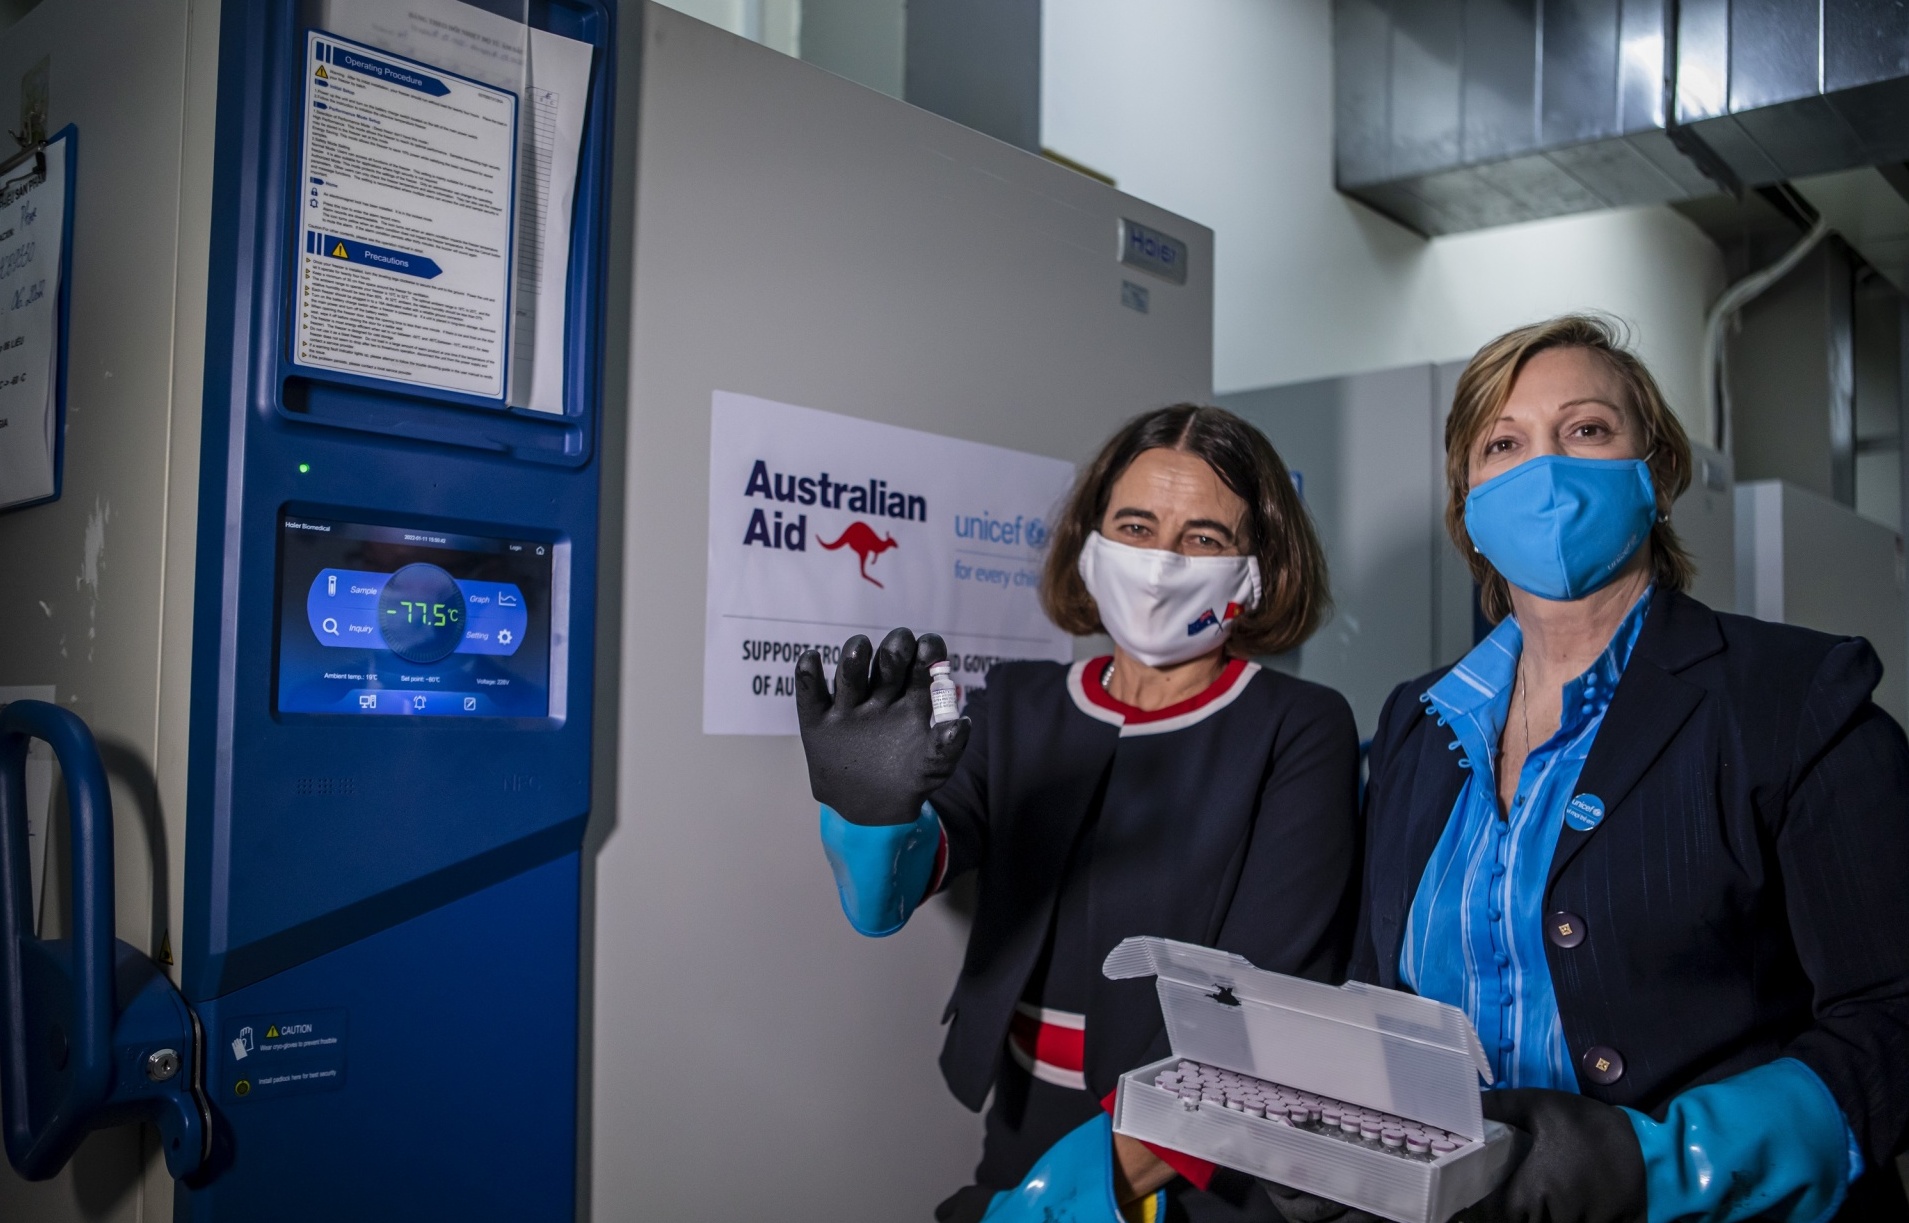 Australia delivers 3.6 million Pfizer vaccine doses to Vietnam with UNICEF support